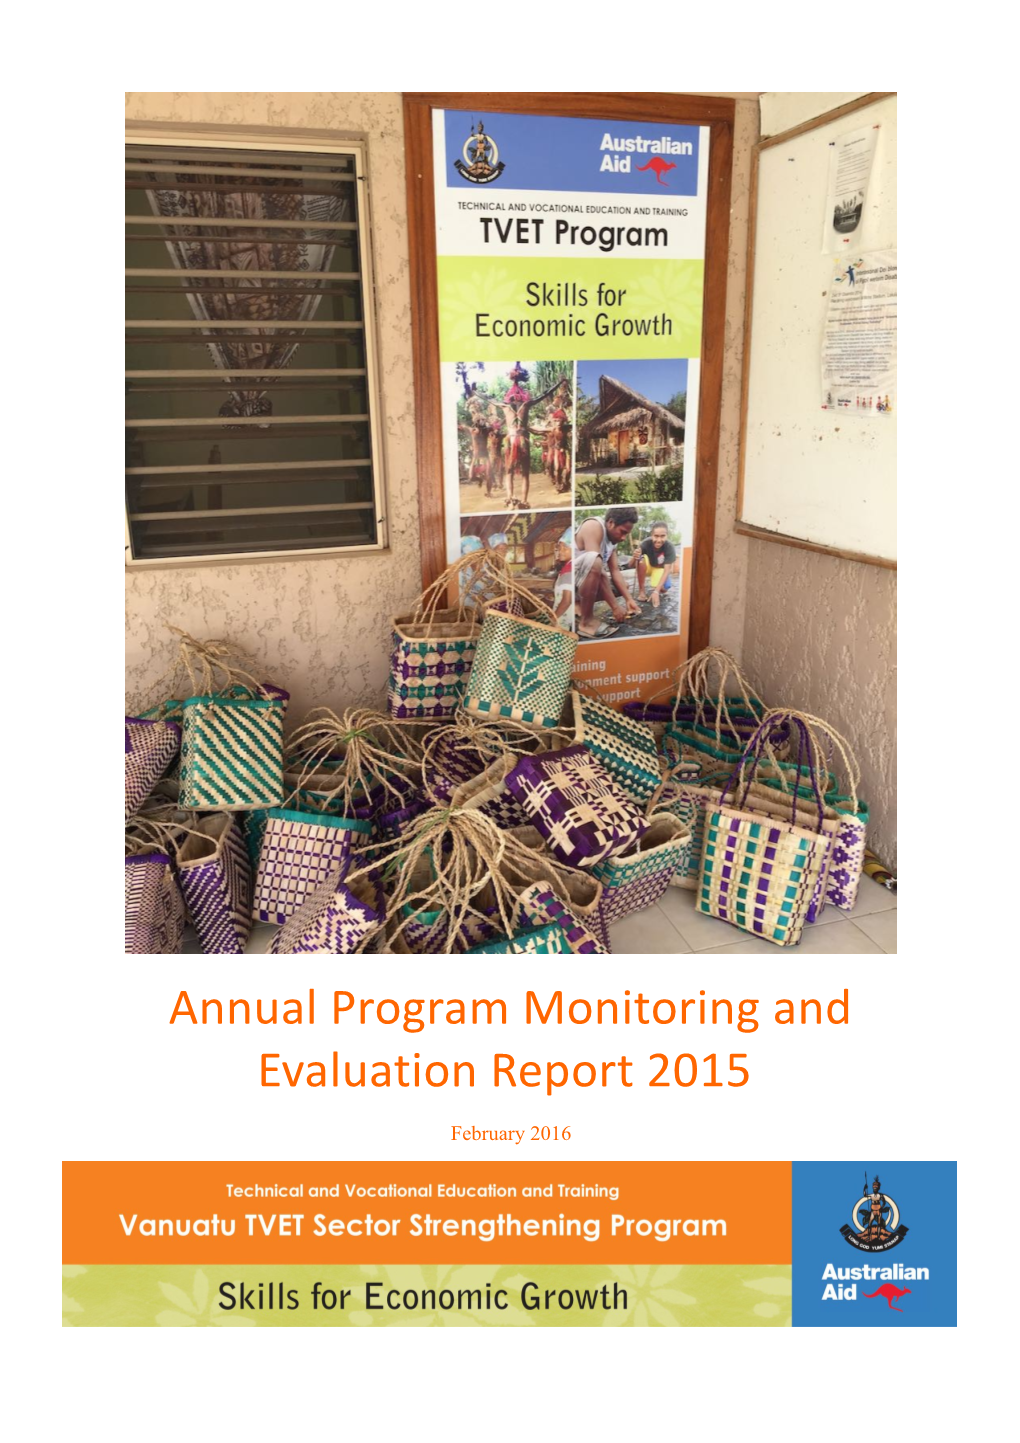 Annual Program Monitoring and Evaluation Report 2015